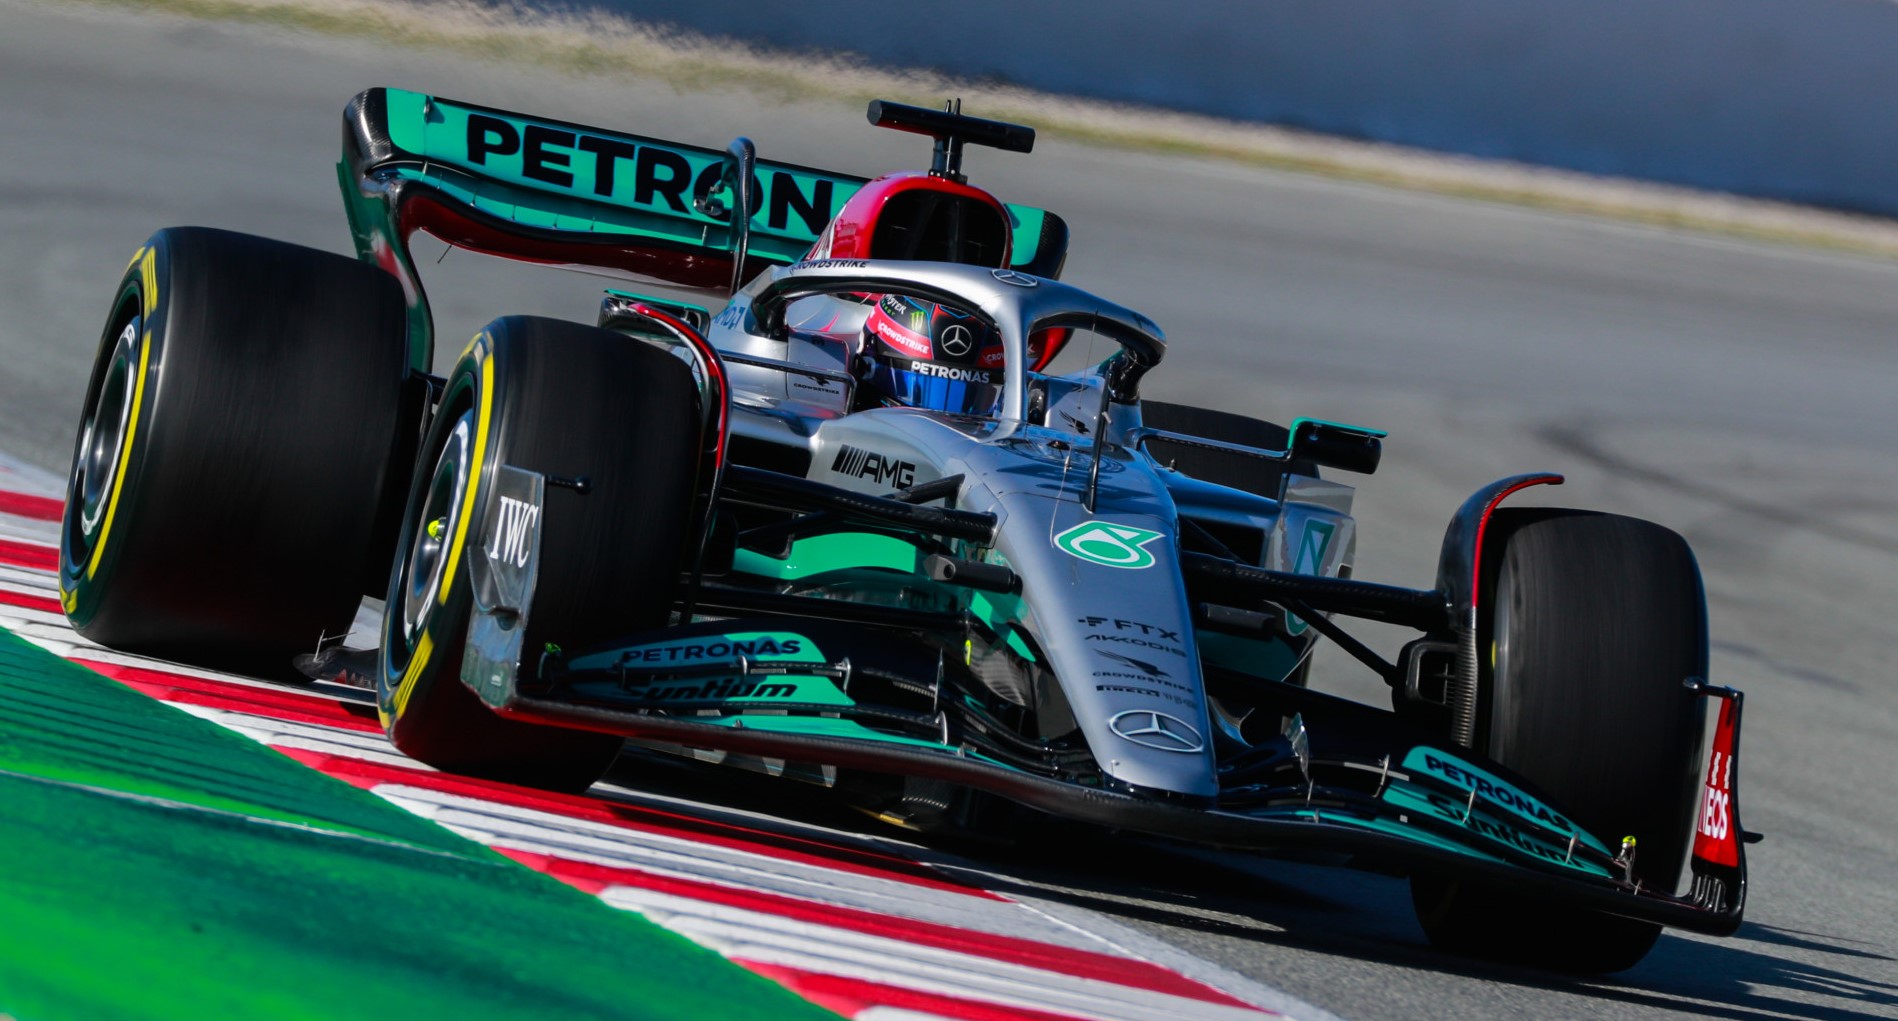 Russell tops morning session in day 3 of Barcelona test